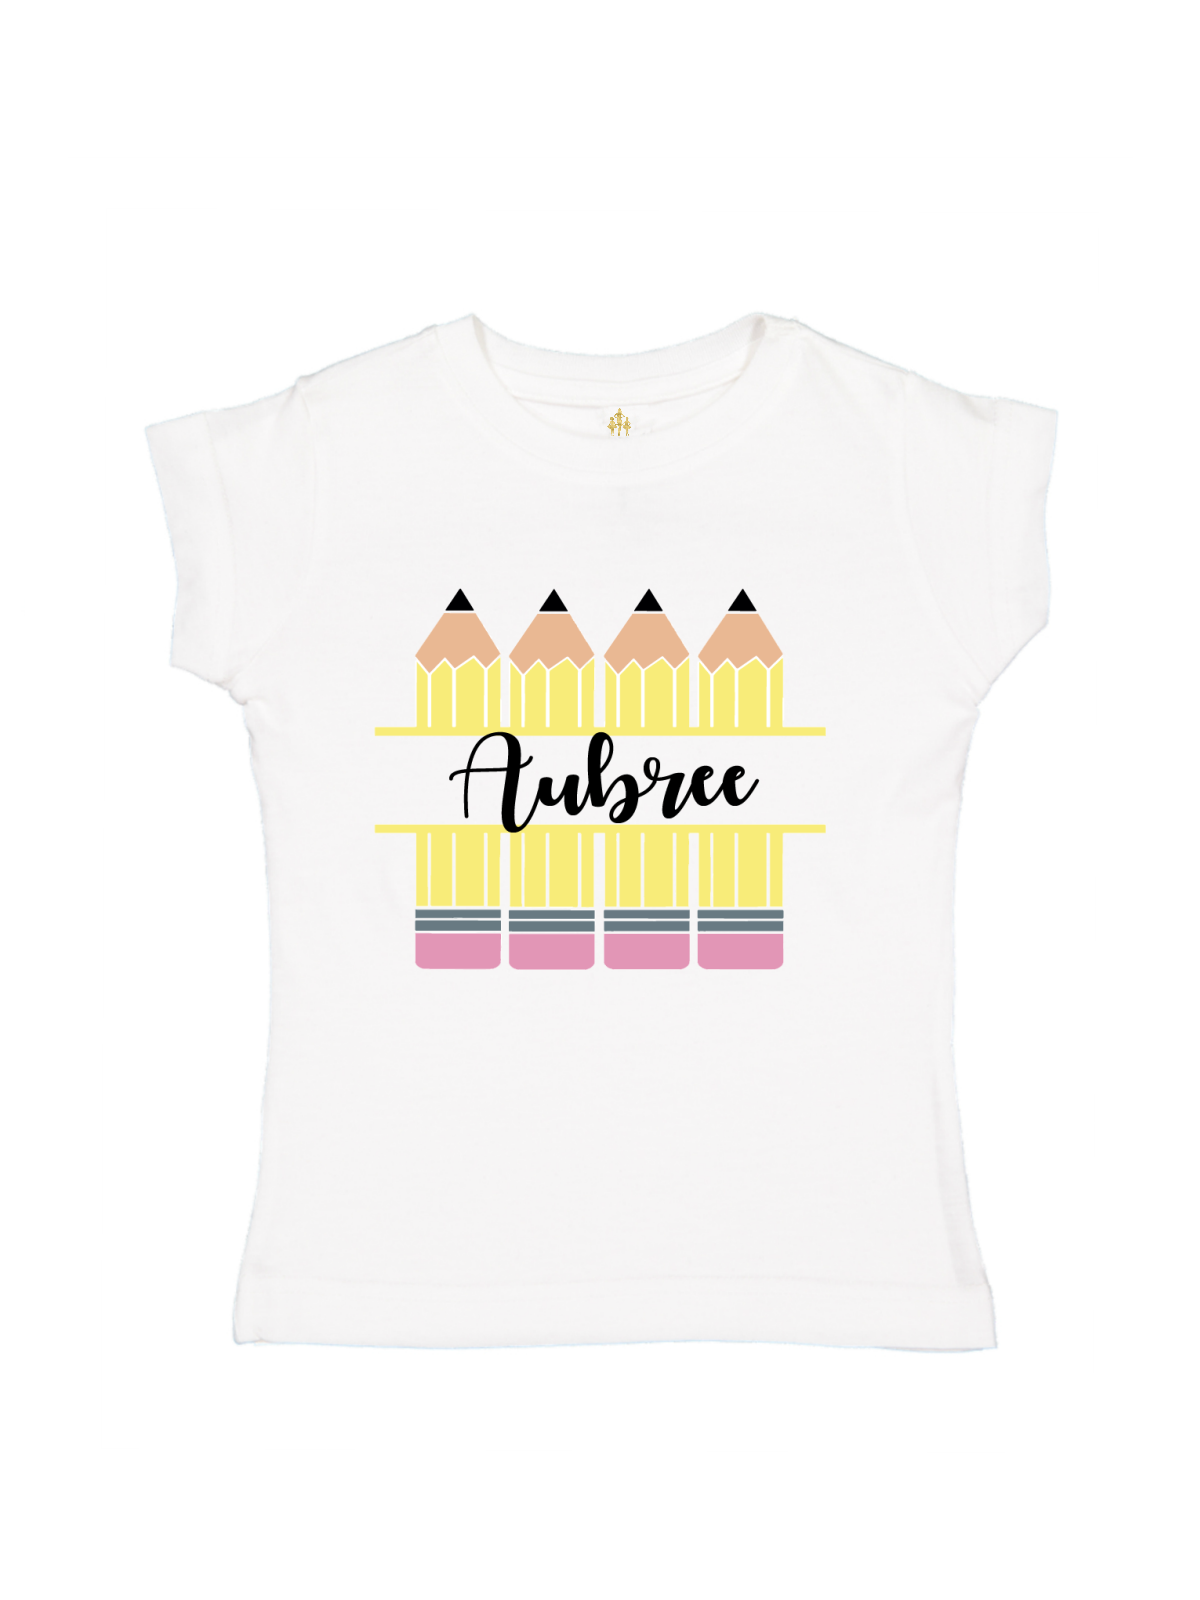 Personalized Pencil Frame Girls Shirt